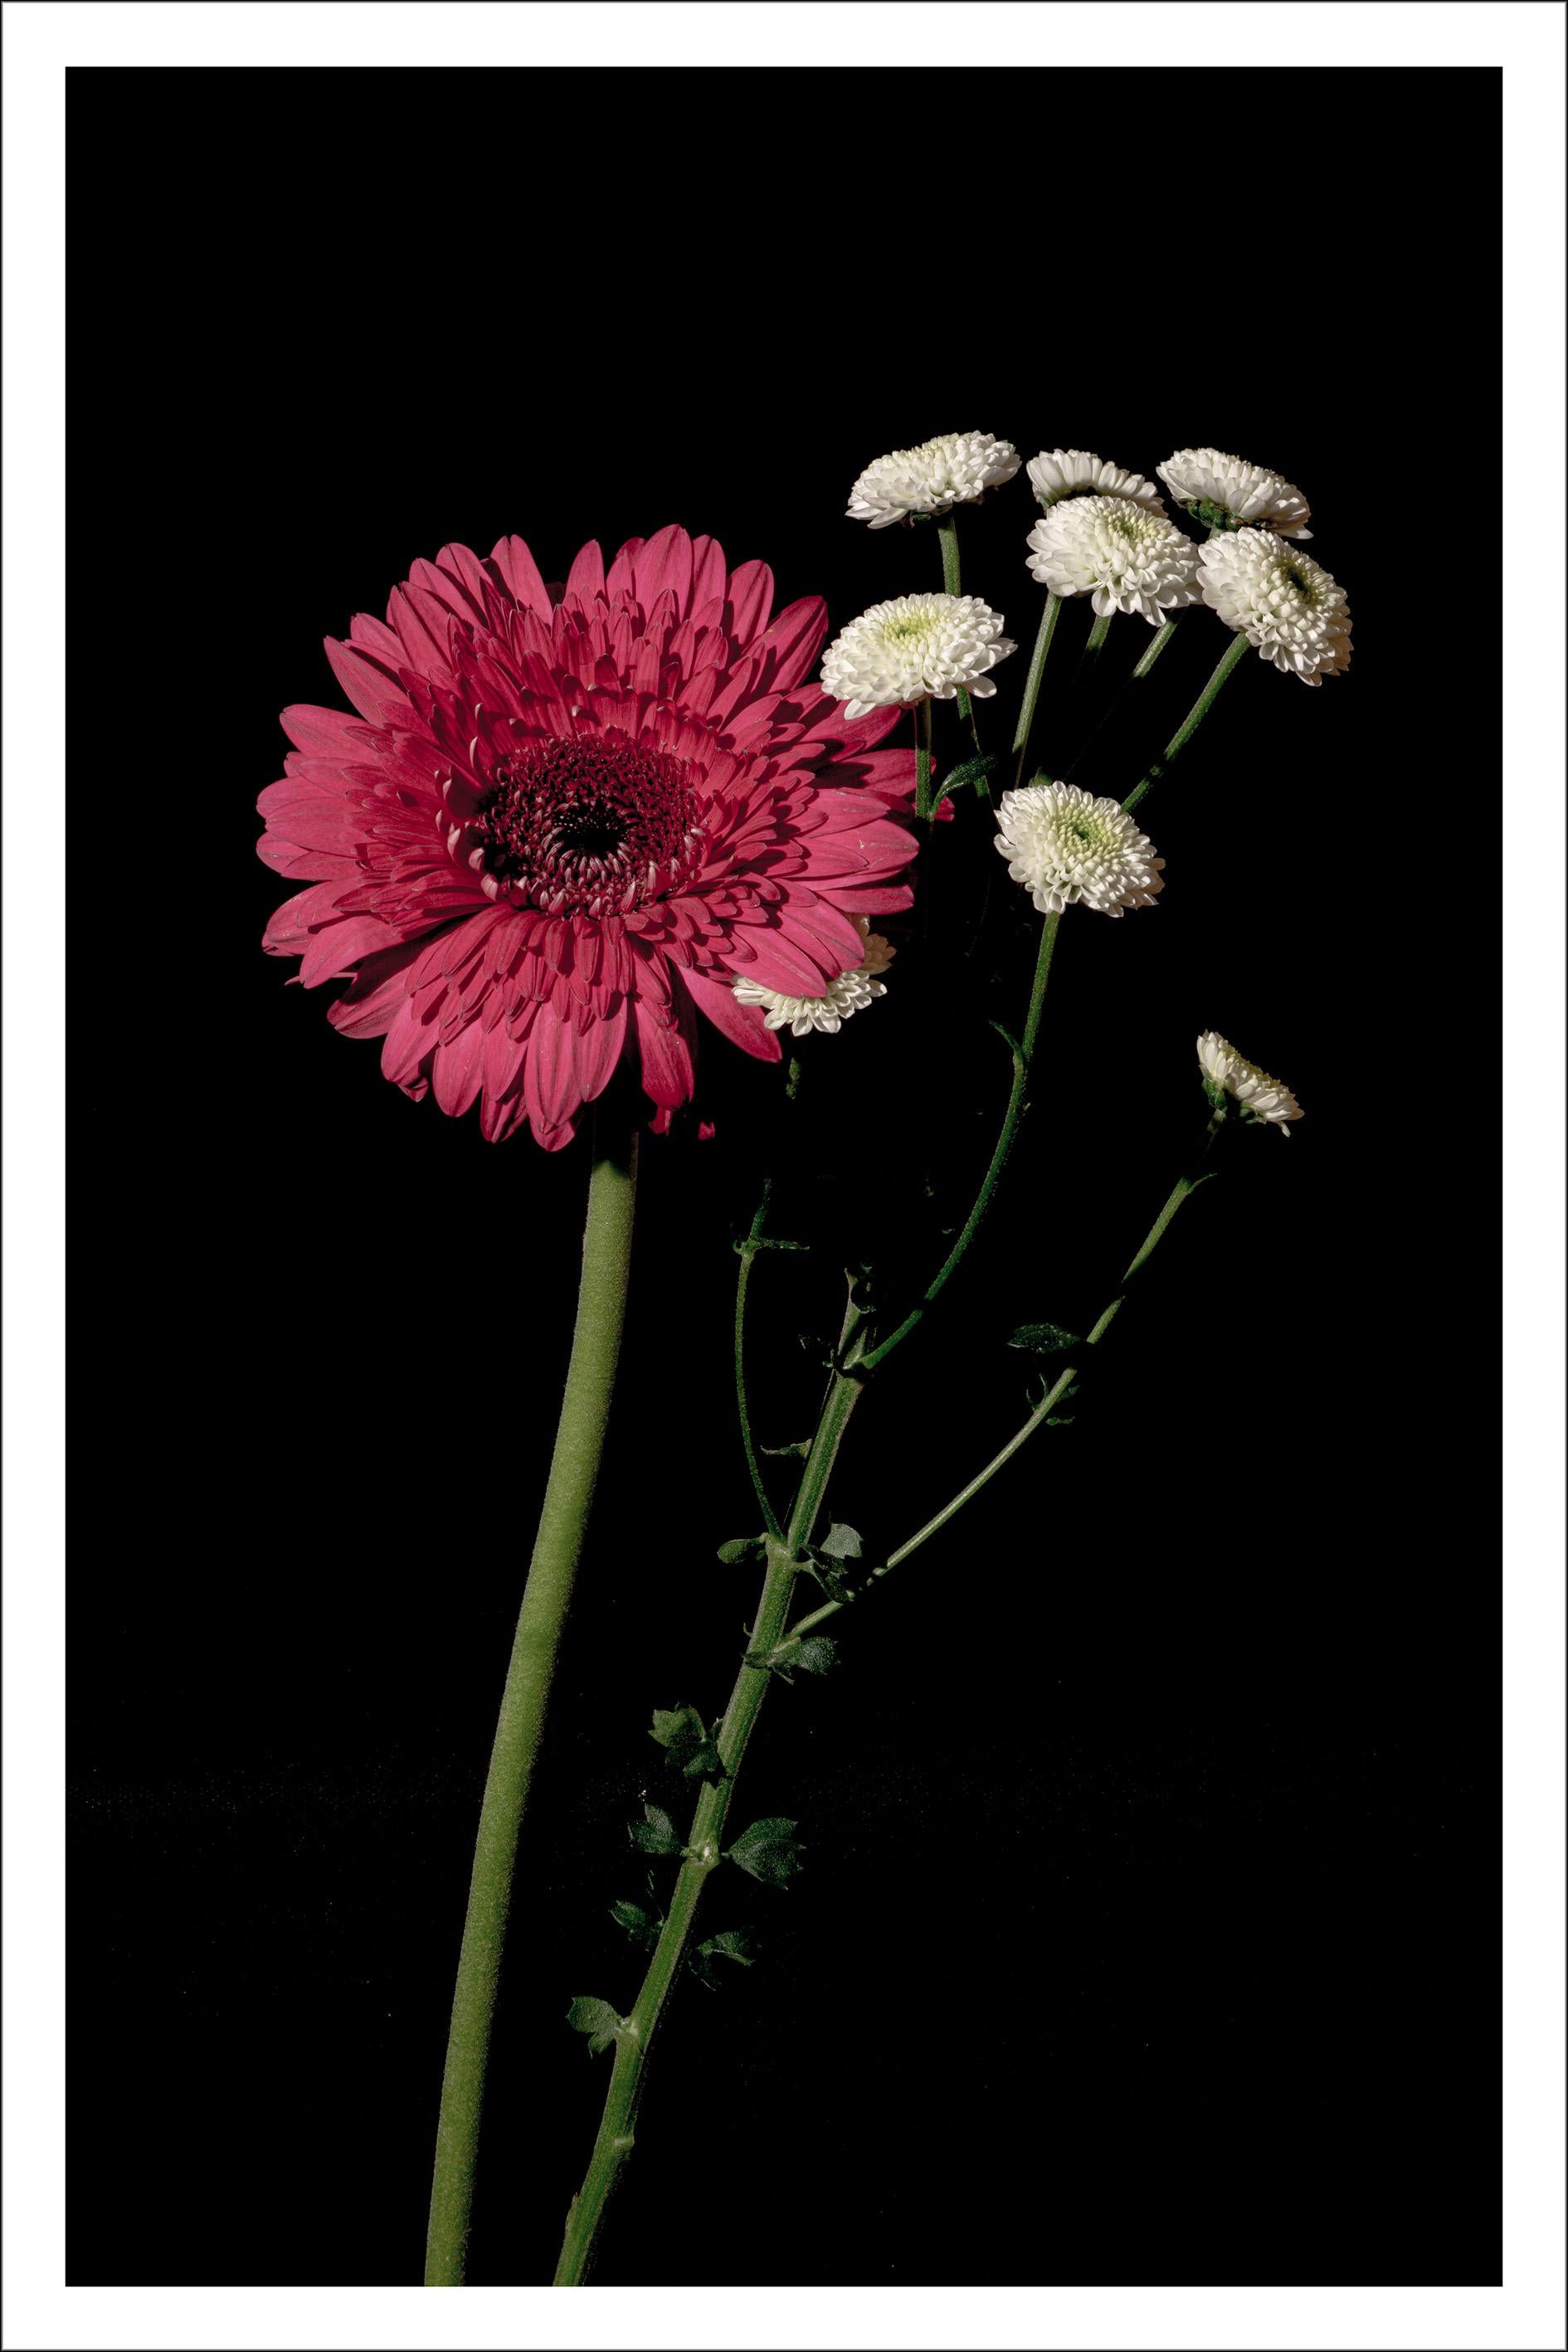 Kind of Cyan Still-Life Print - Pink and White Delicate Flowers, Black Background, Bright Elegant Giclée Print